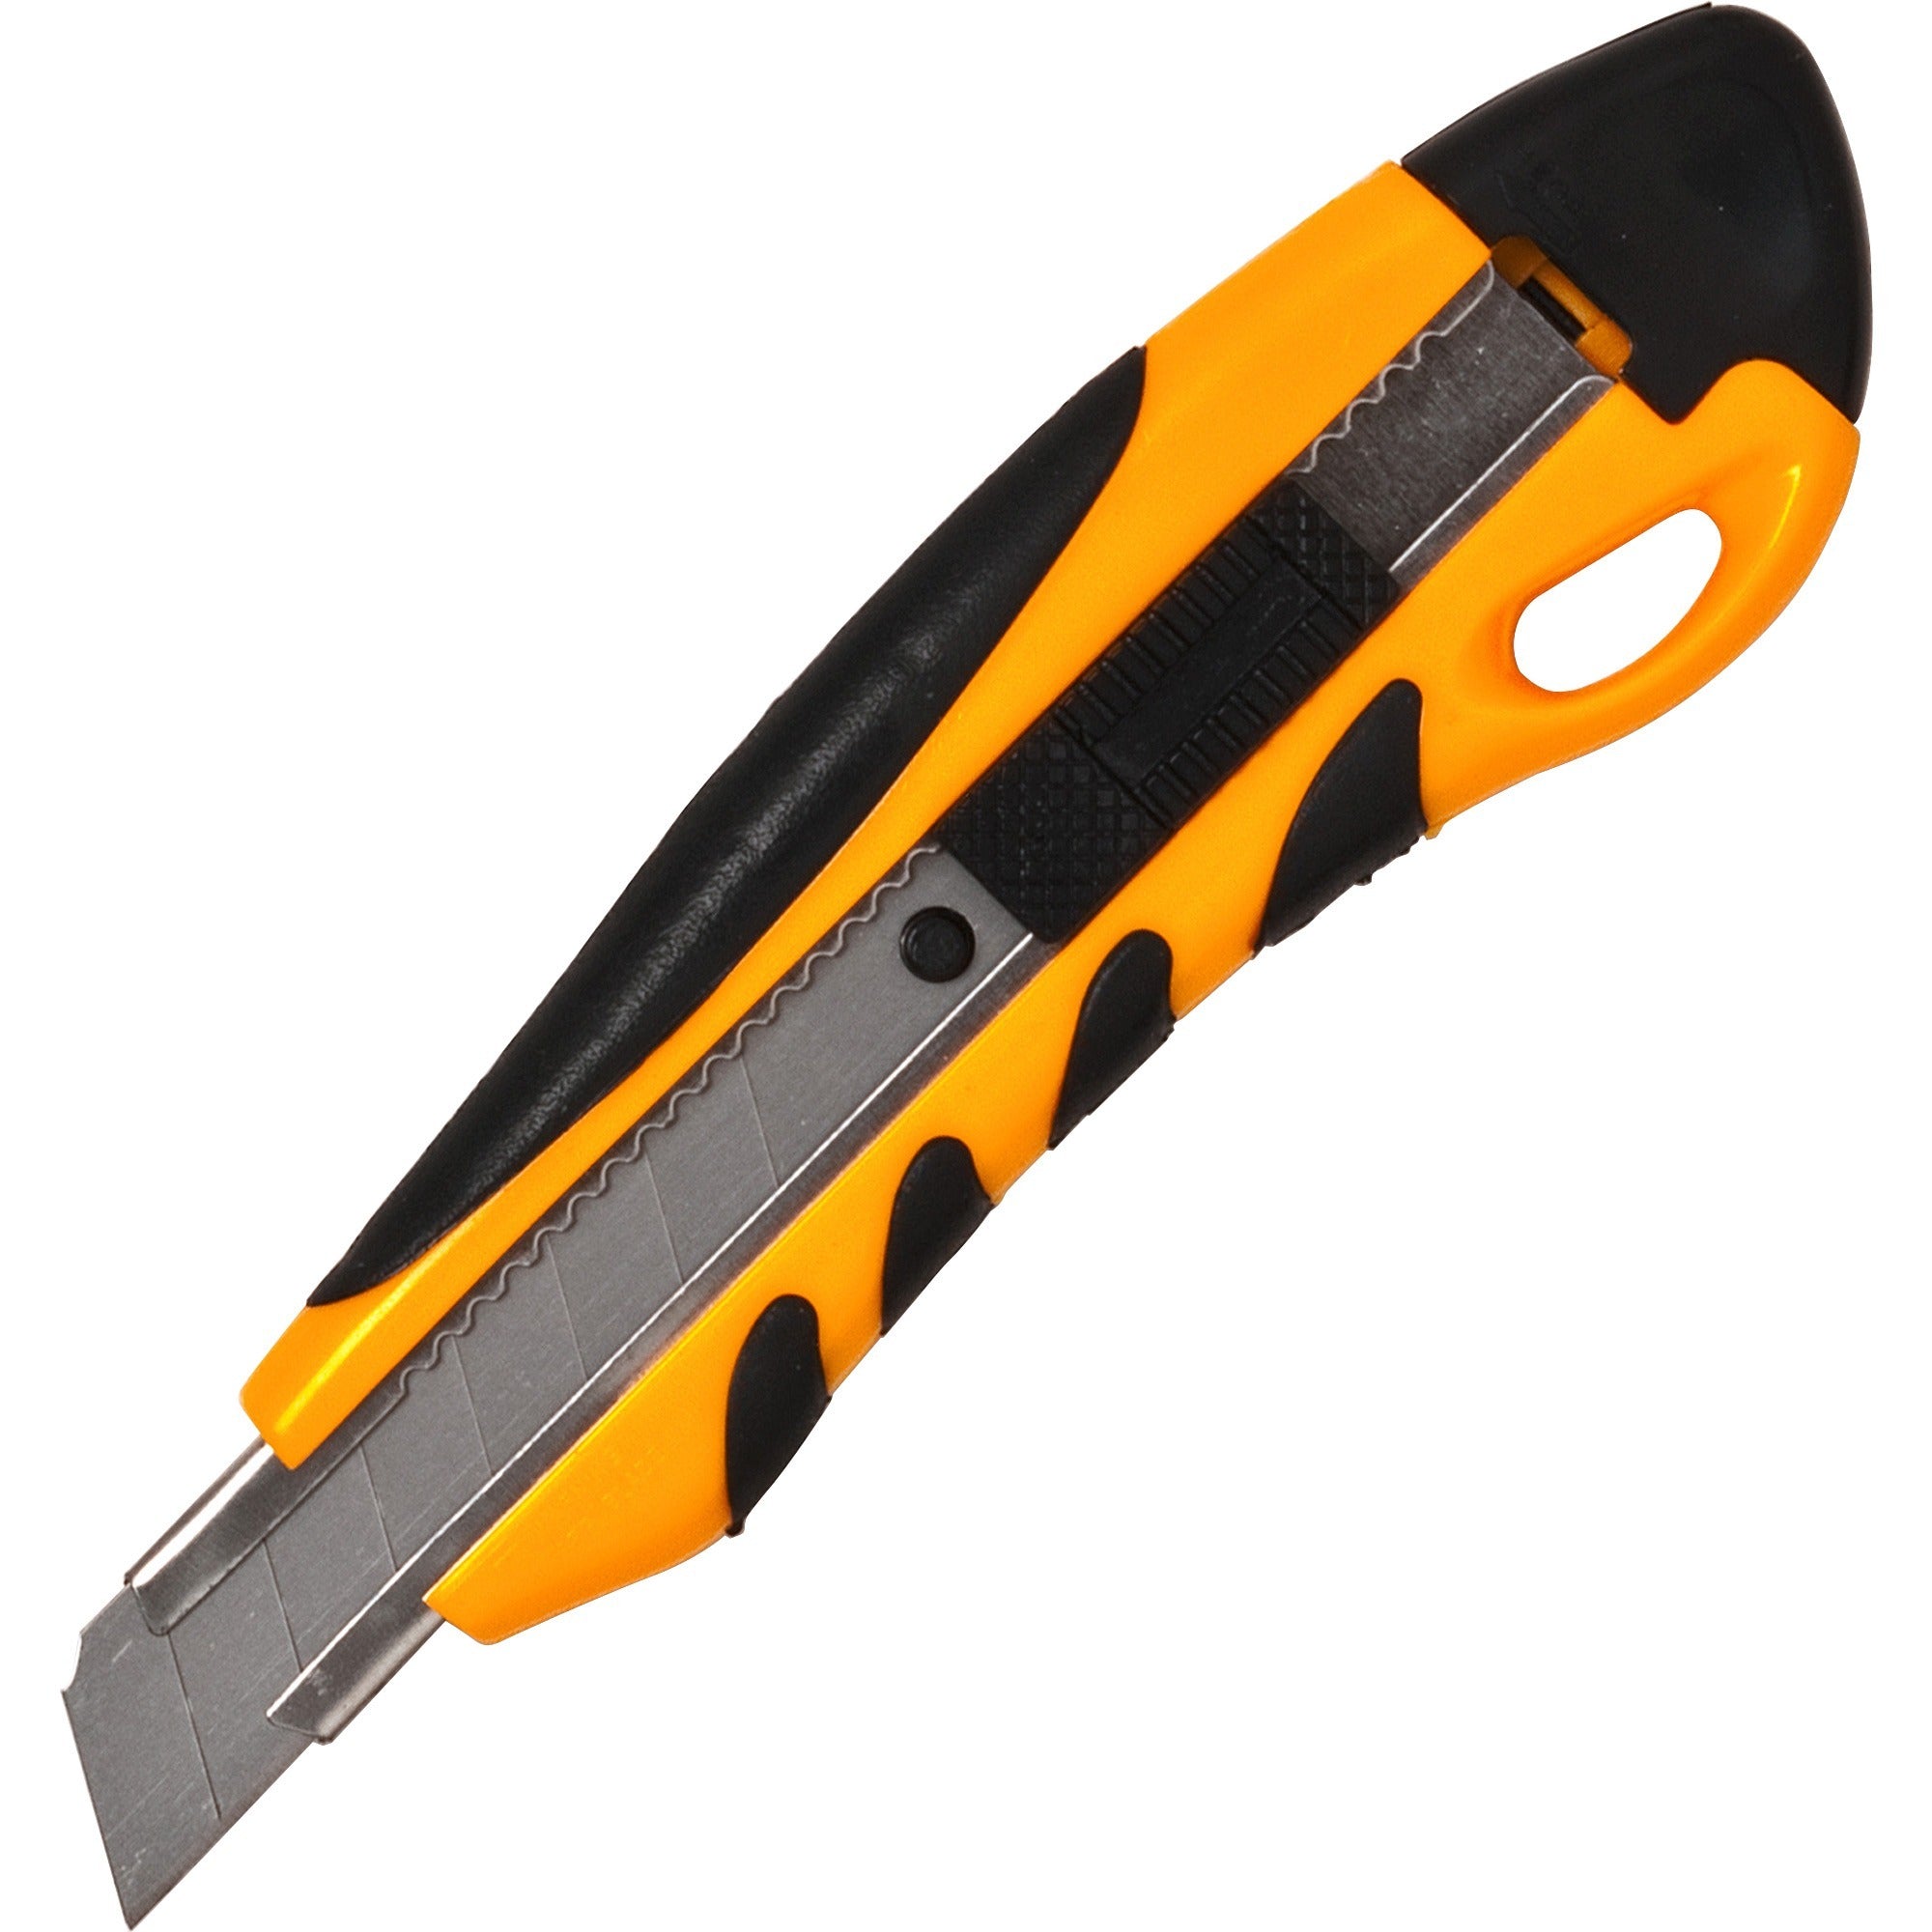 Sparco PVC Anti-Slip Rubber Grip Utility Knife - Stainless Steel Blade - Heavy Duty - Yellow - 1 Each - 